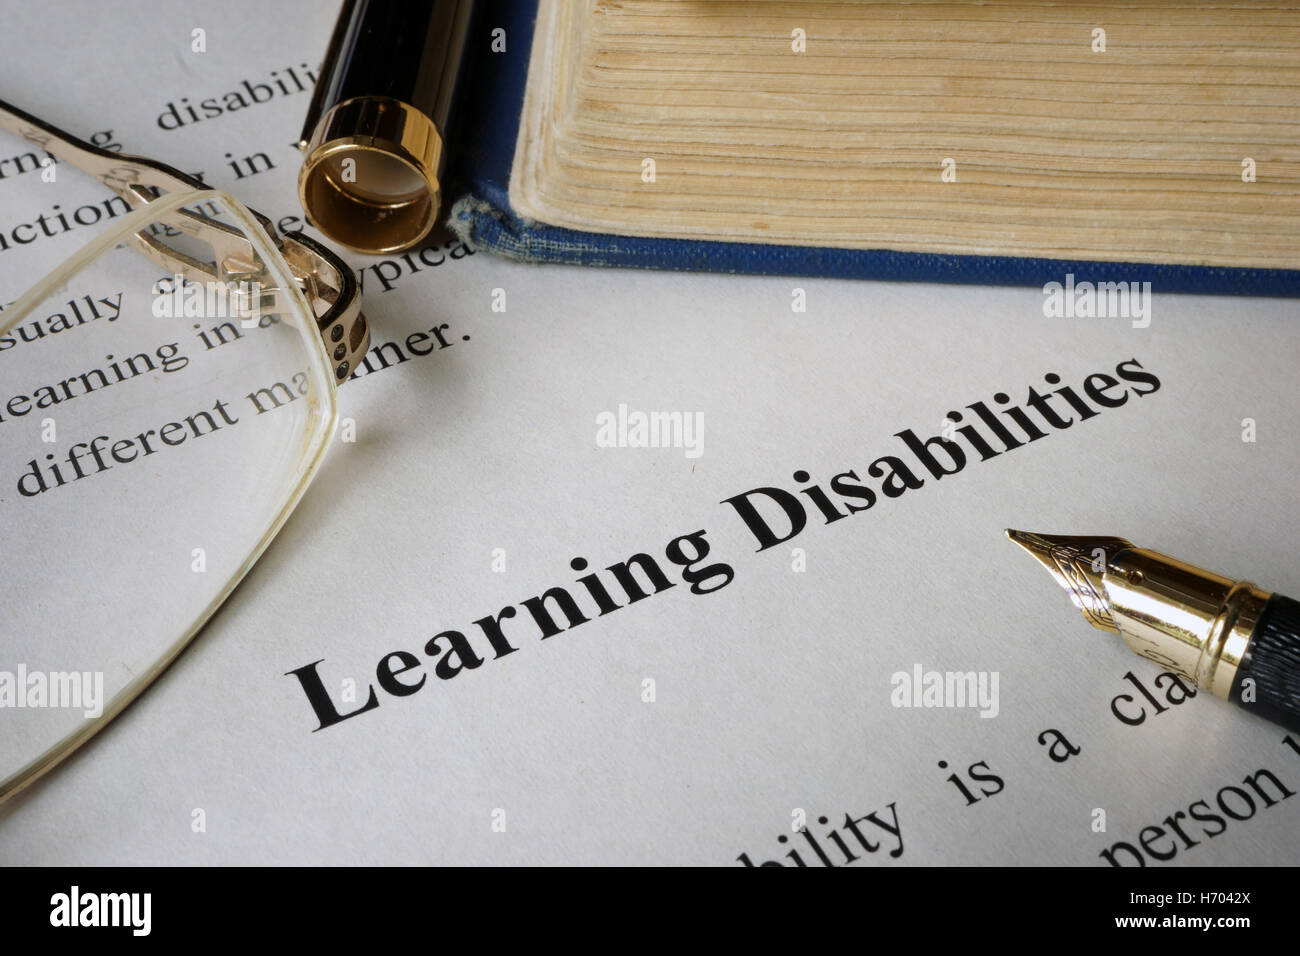 Learning disabilities on a sheet on an office table. Stock Photo